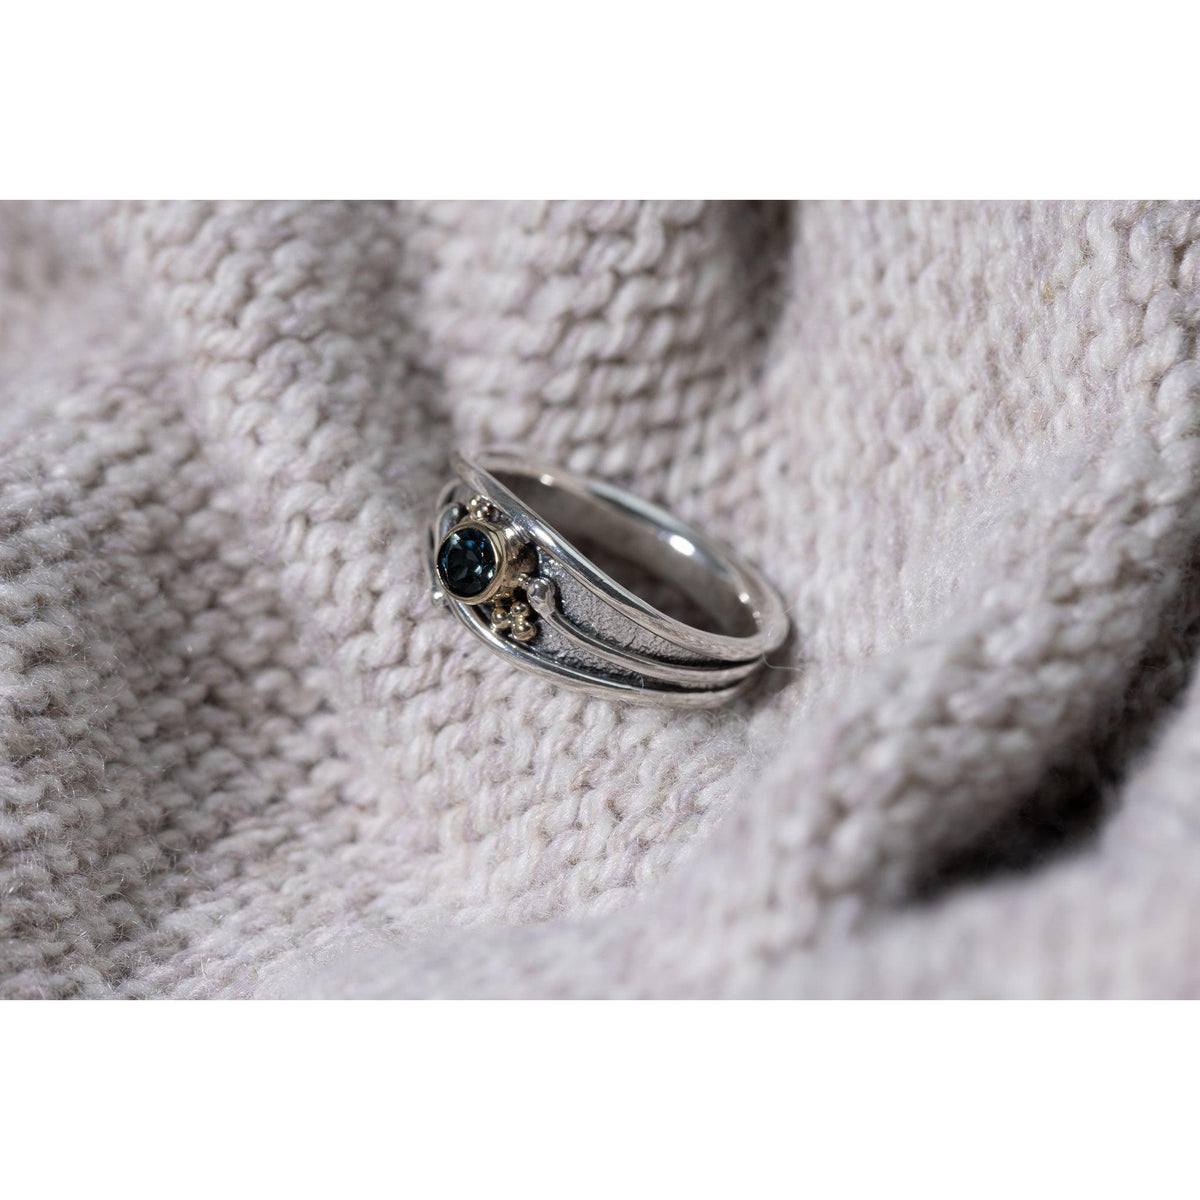 &#39;LG65 - Silver Ring with 9ct Gold 4mm London Blue Topaz Ring &#39; by Les Grimshaw, available at Padstow Gallery, Cornwall